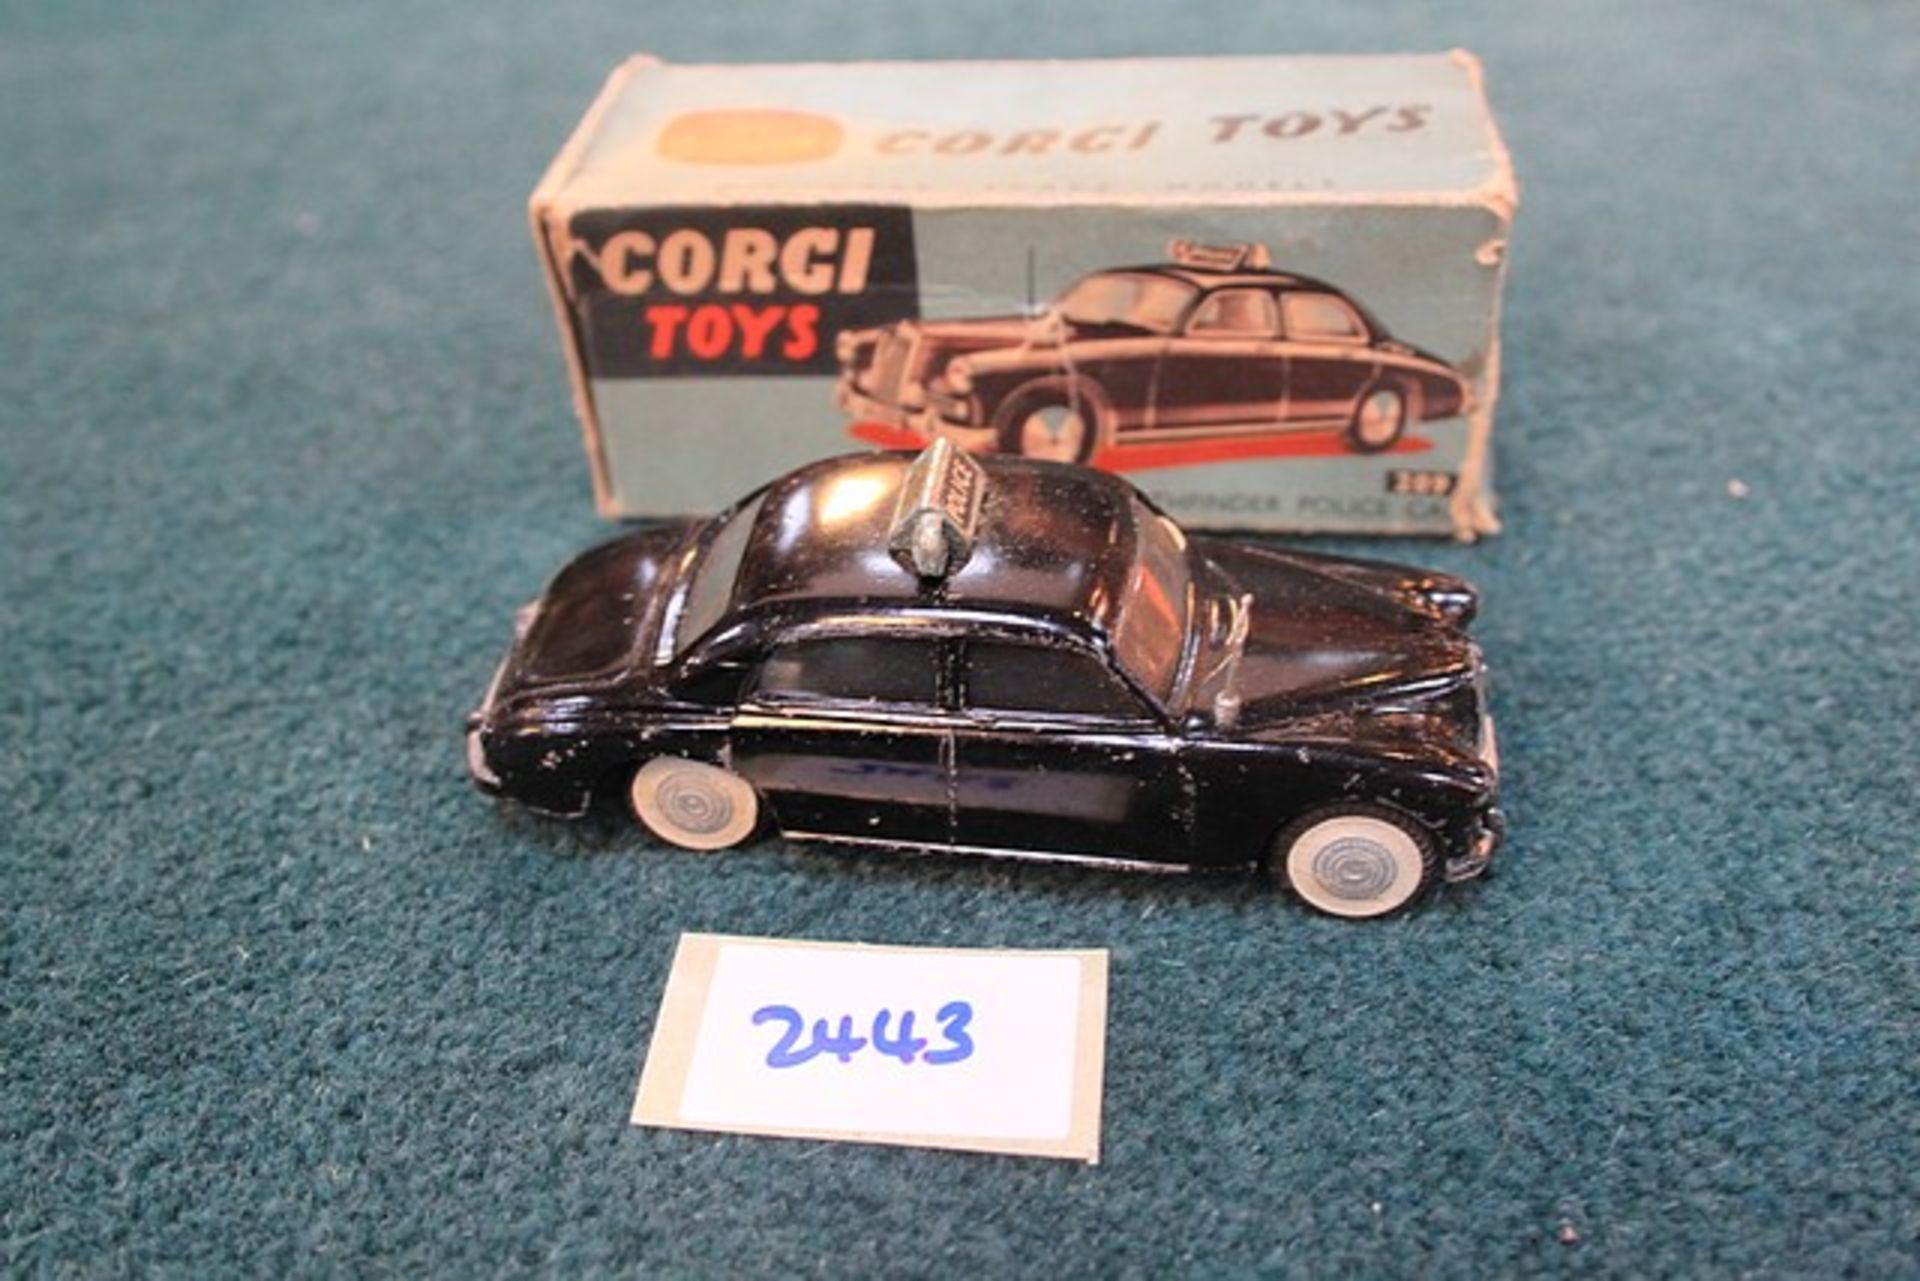 Corgi Toys Diecast model 209 Riley Pathfinder police car complete with box (damage to box) - Image 2 of 2